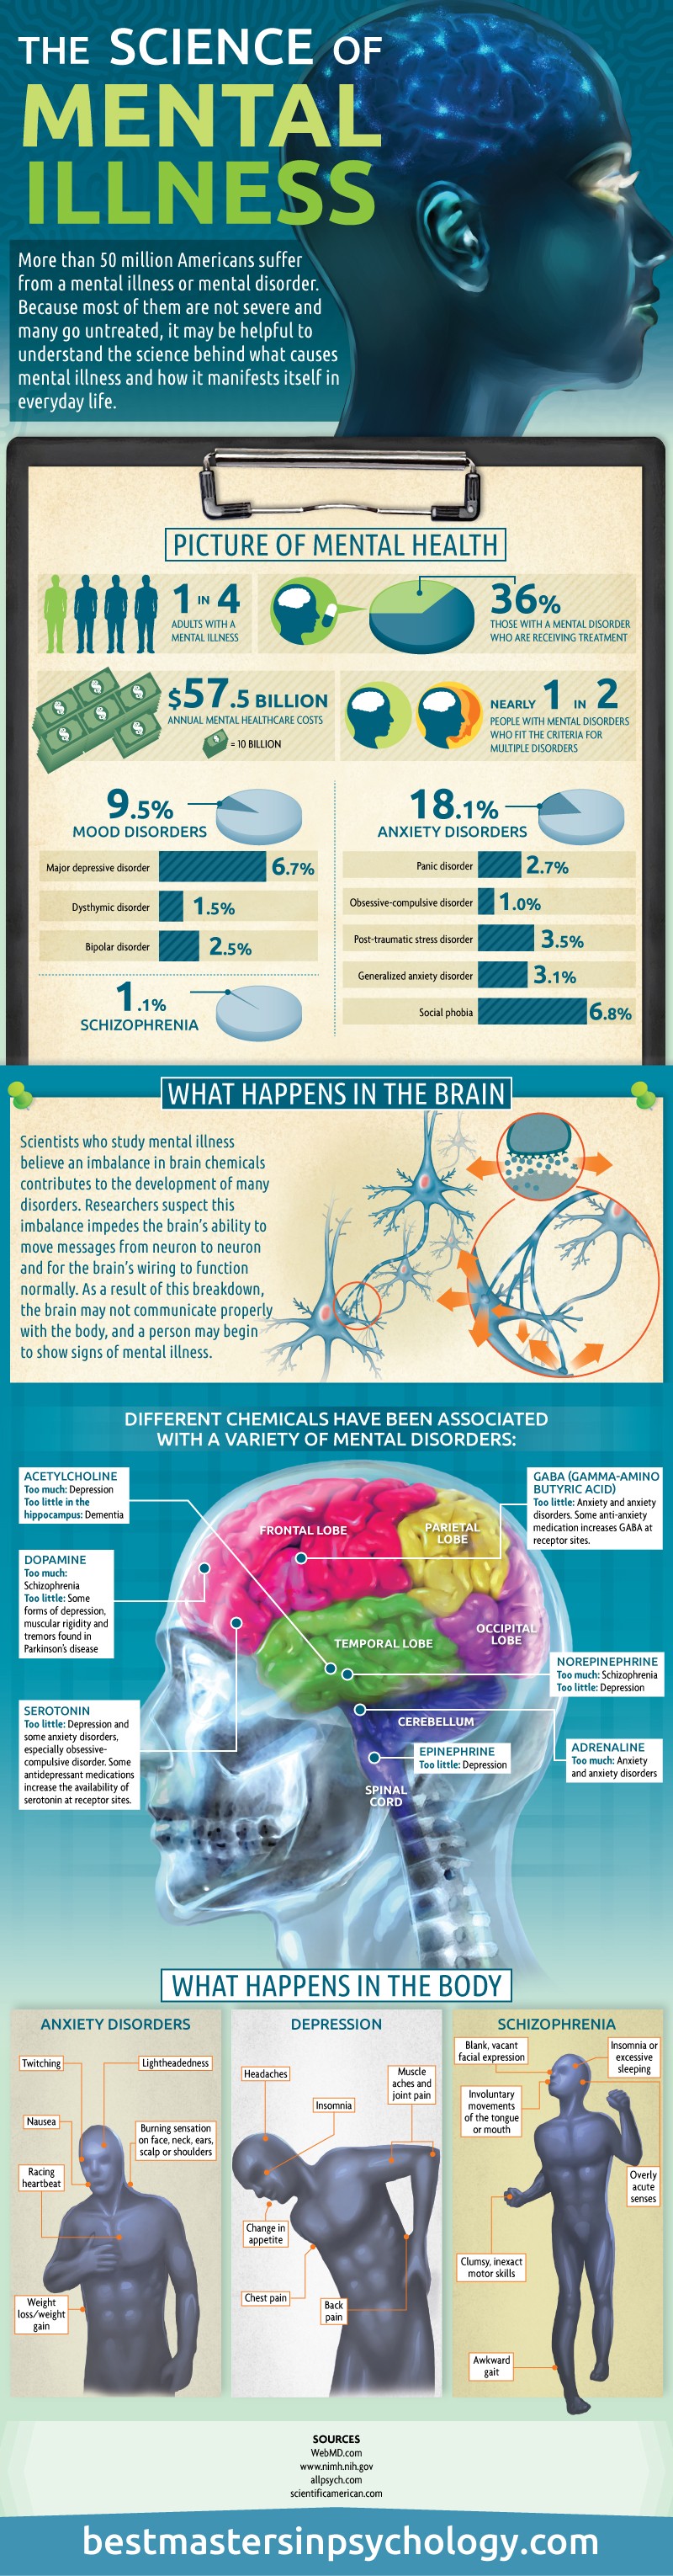 The Science of Mental Illness [Infographic]